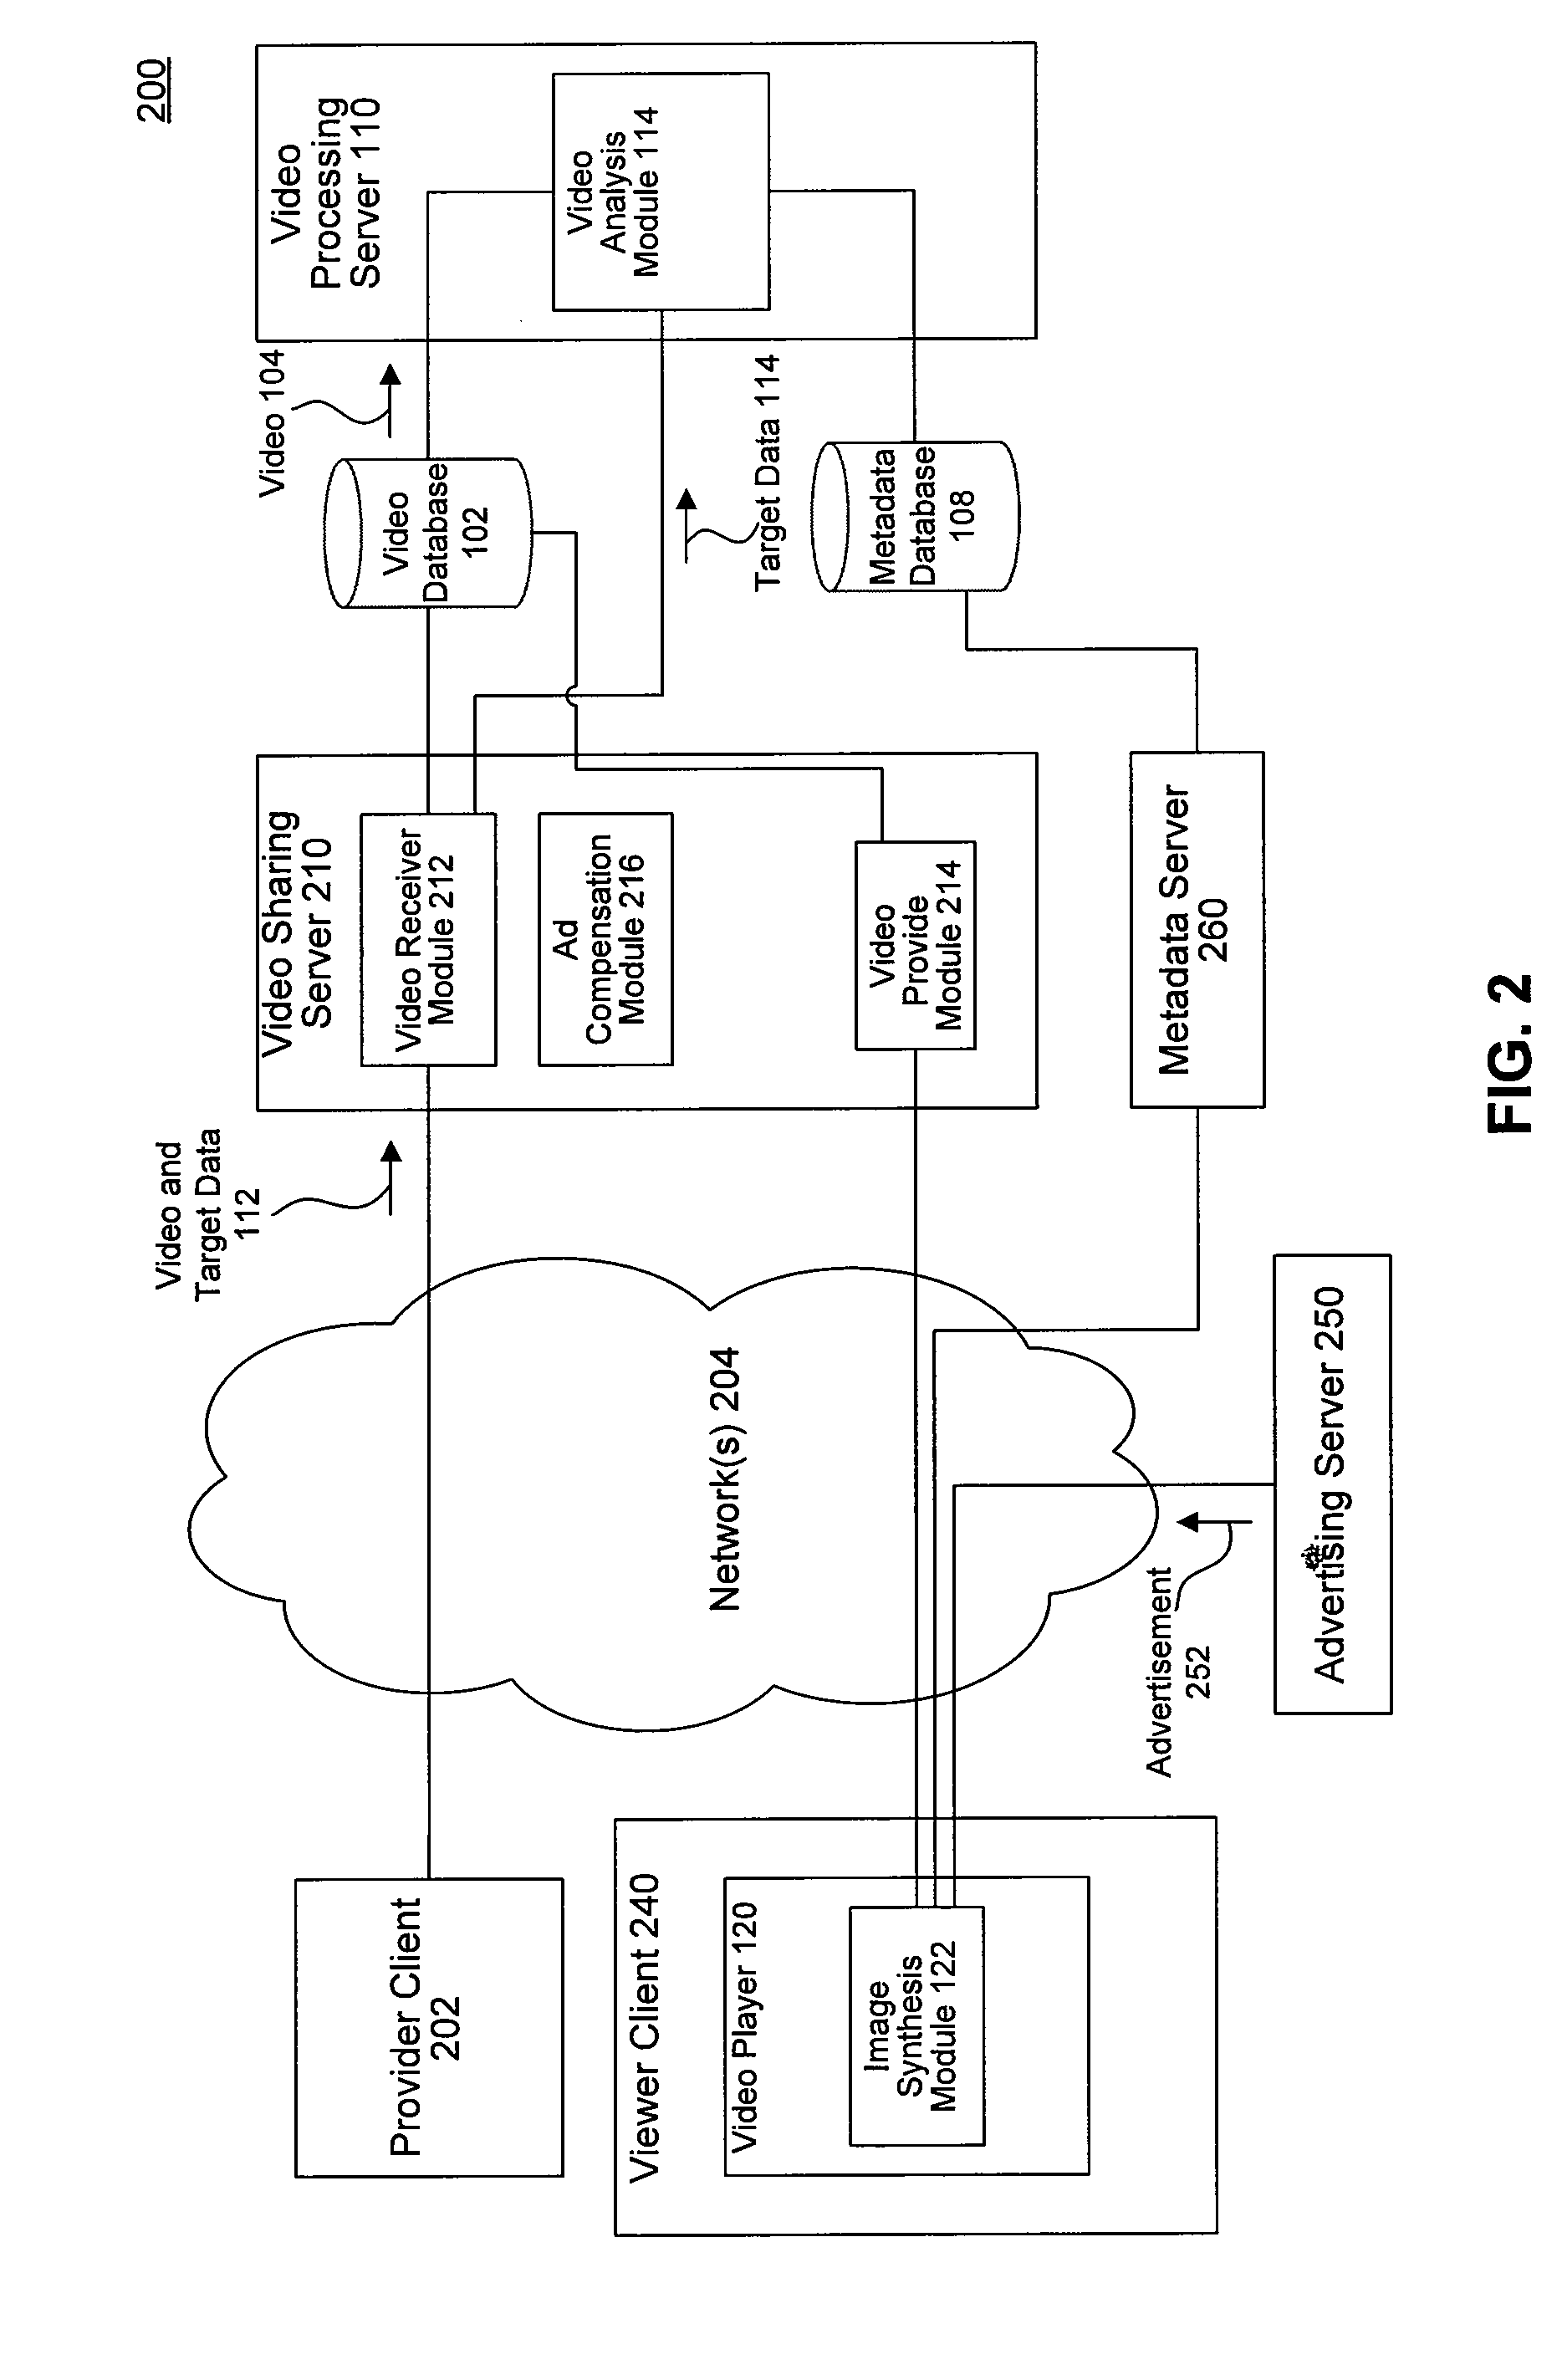 Preprocessing Video to Insert Visual Elements and Applications Thereof